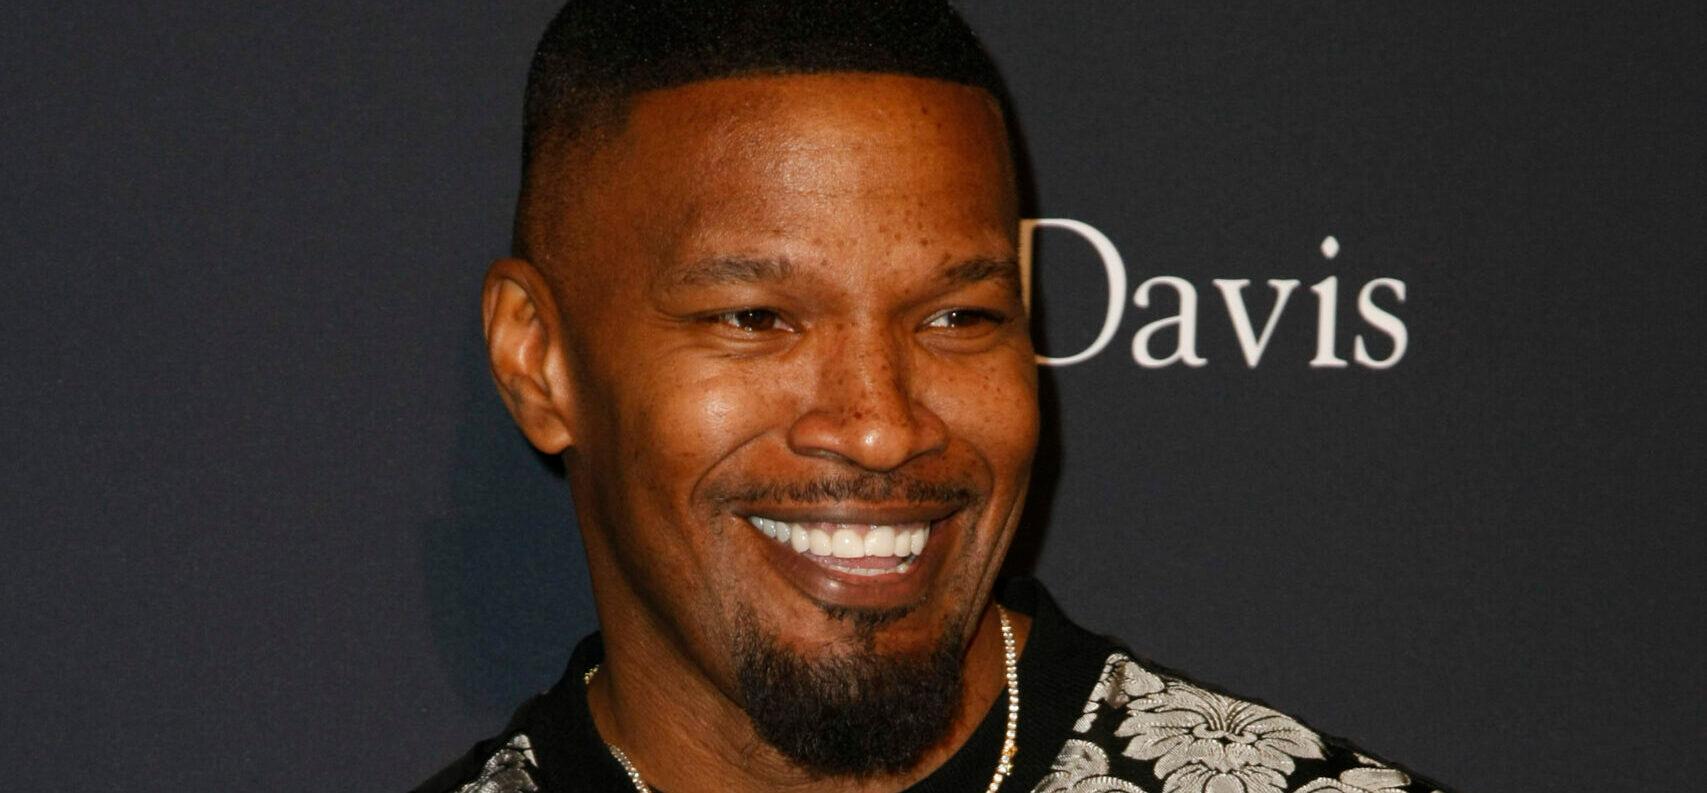 New Update About Jamie Foxx’s Health Crisis Reveals He Is ‘Still Not Himself’ Yet